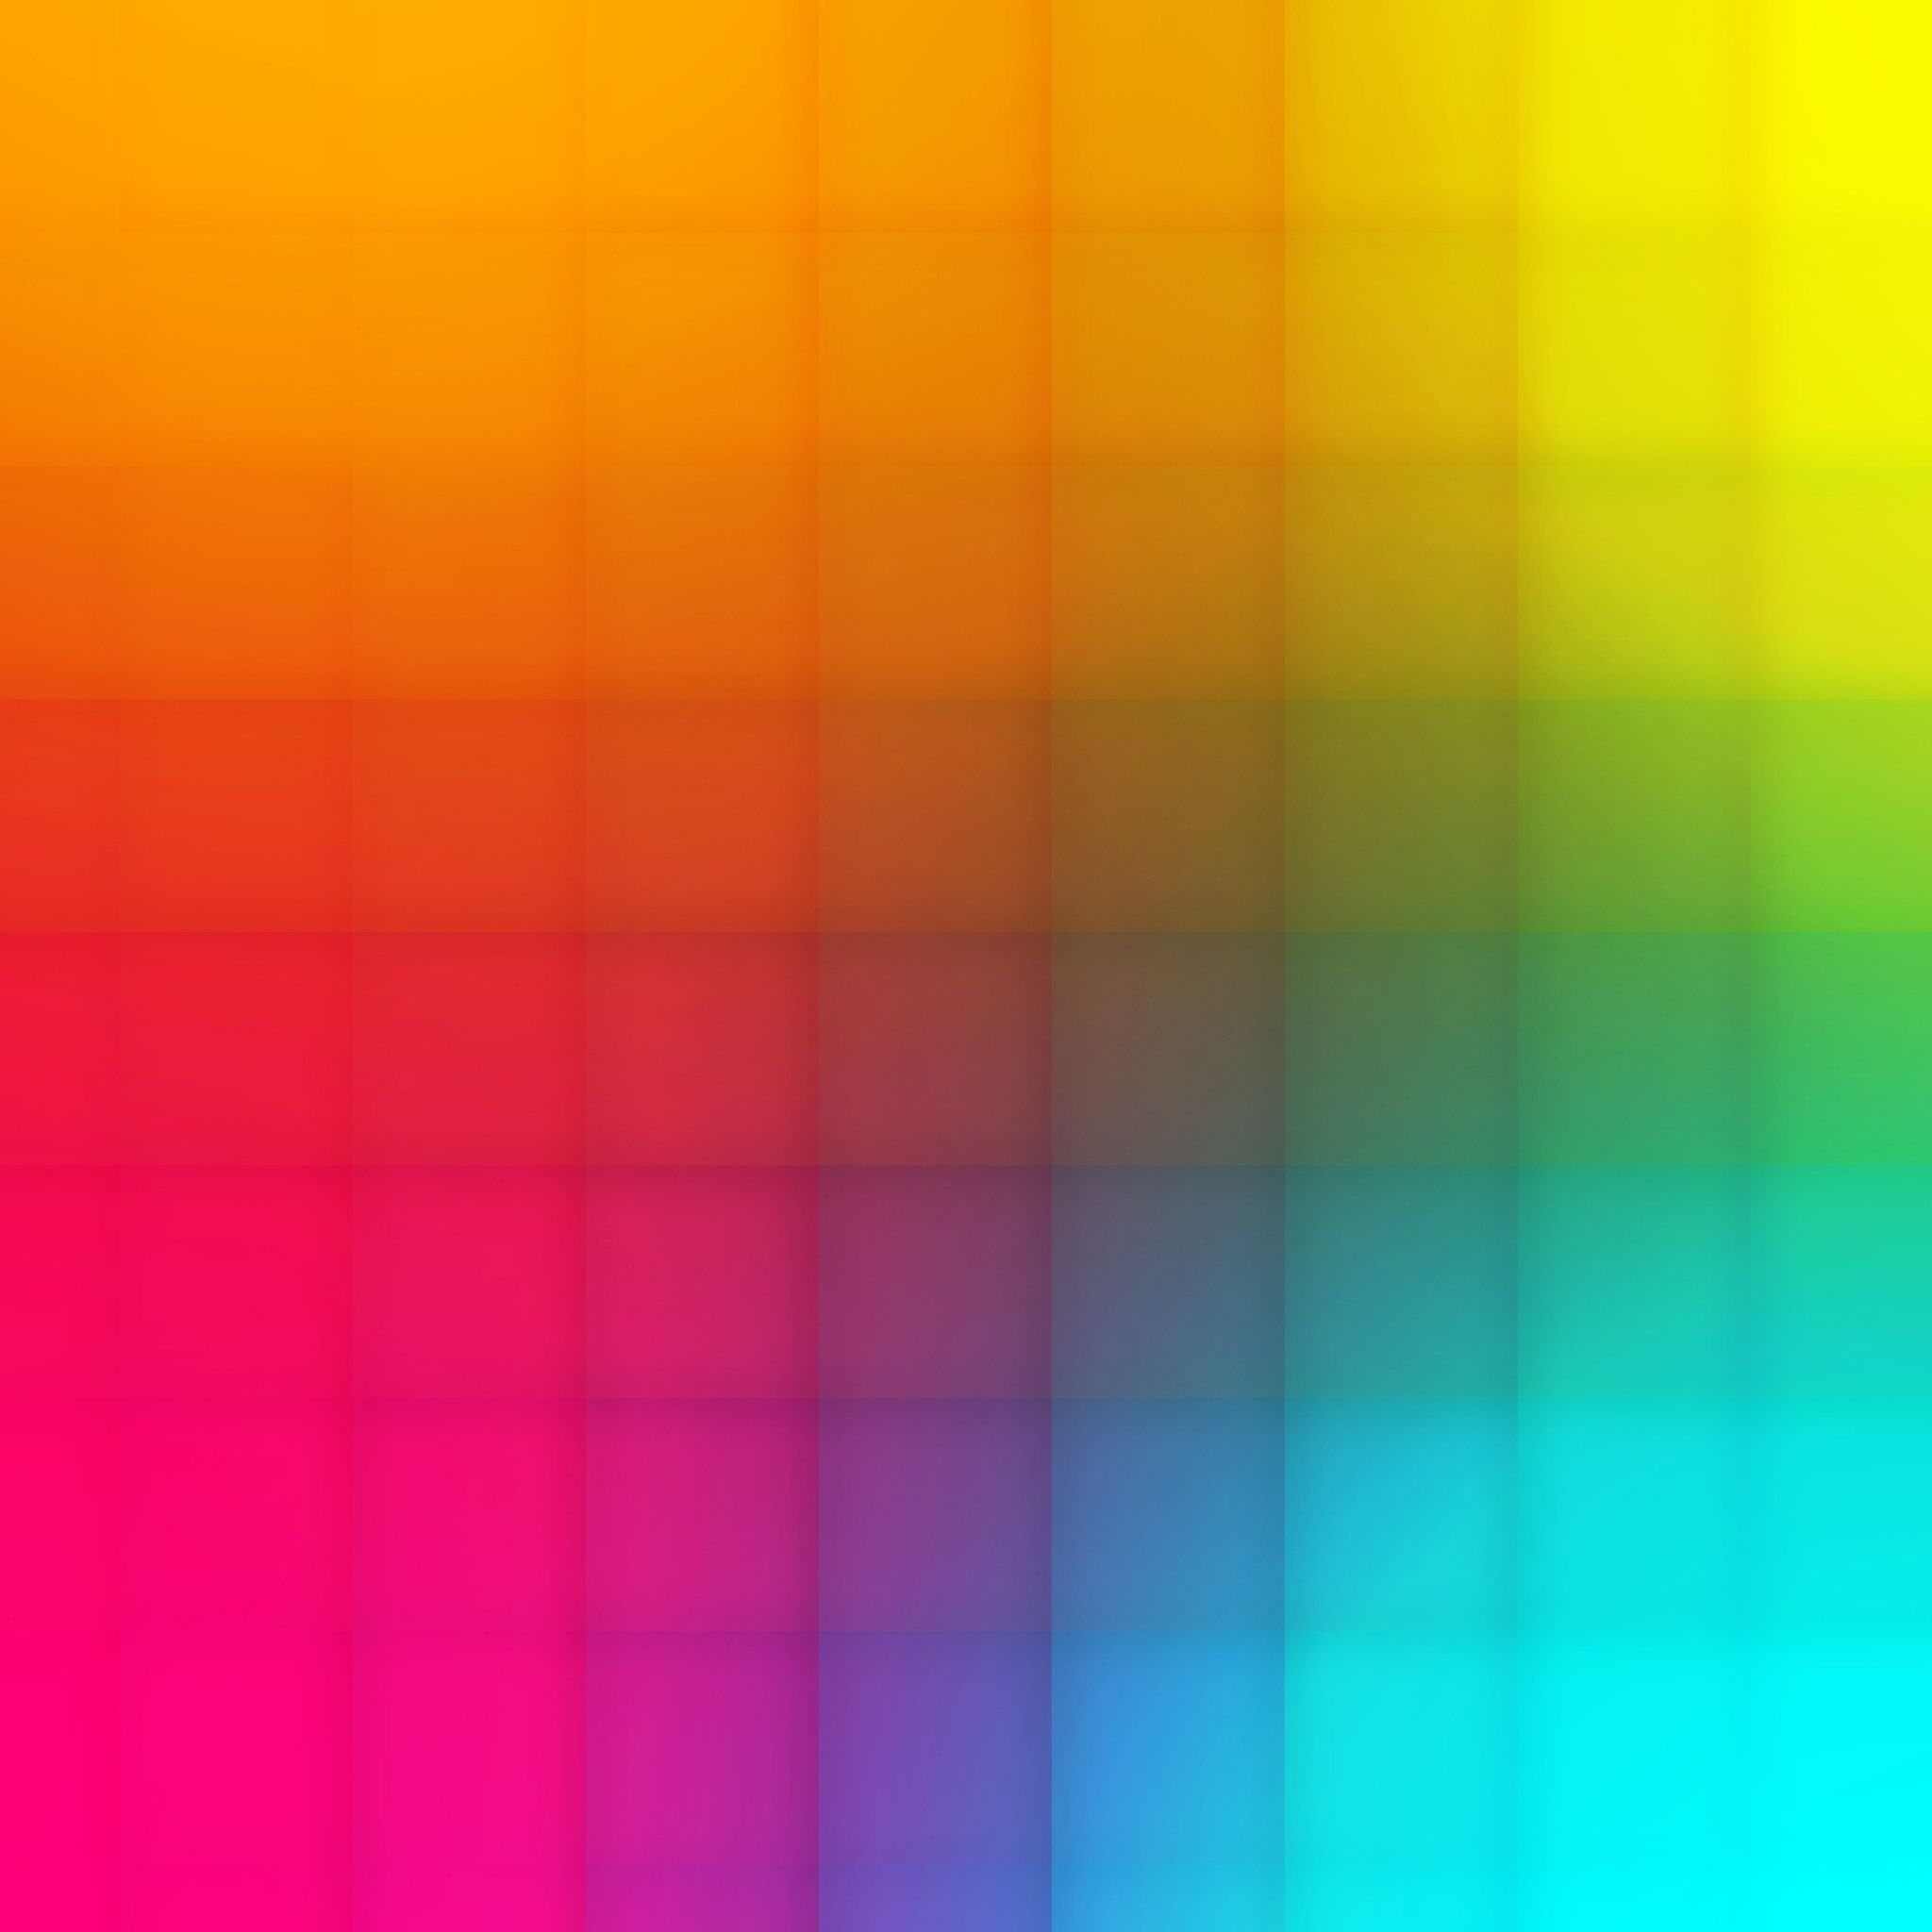 Download Wallpaper 2048x2048 Squares, Background, Multi-colored ...